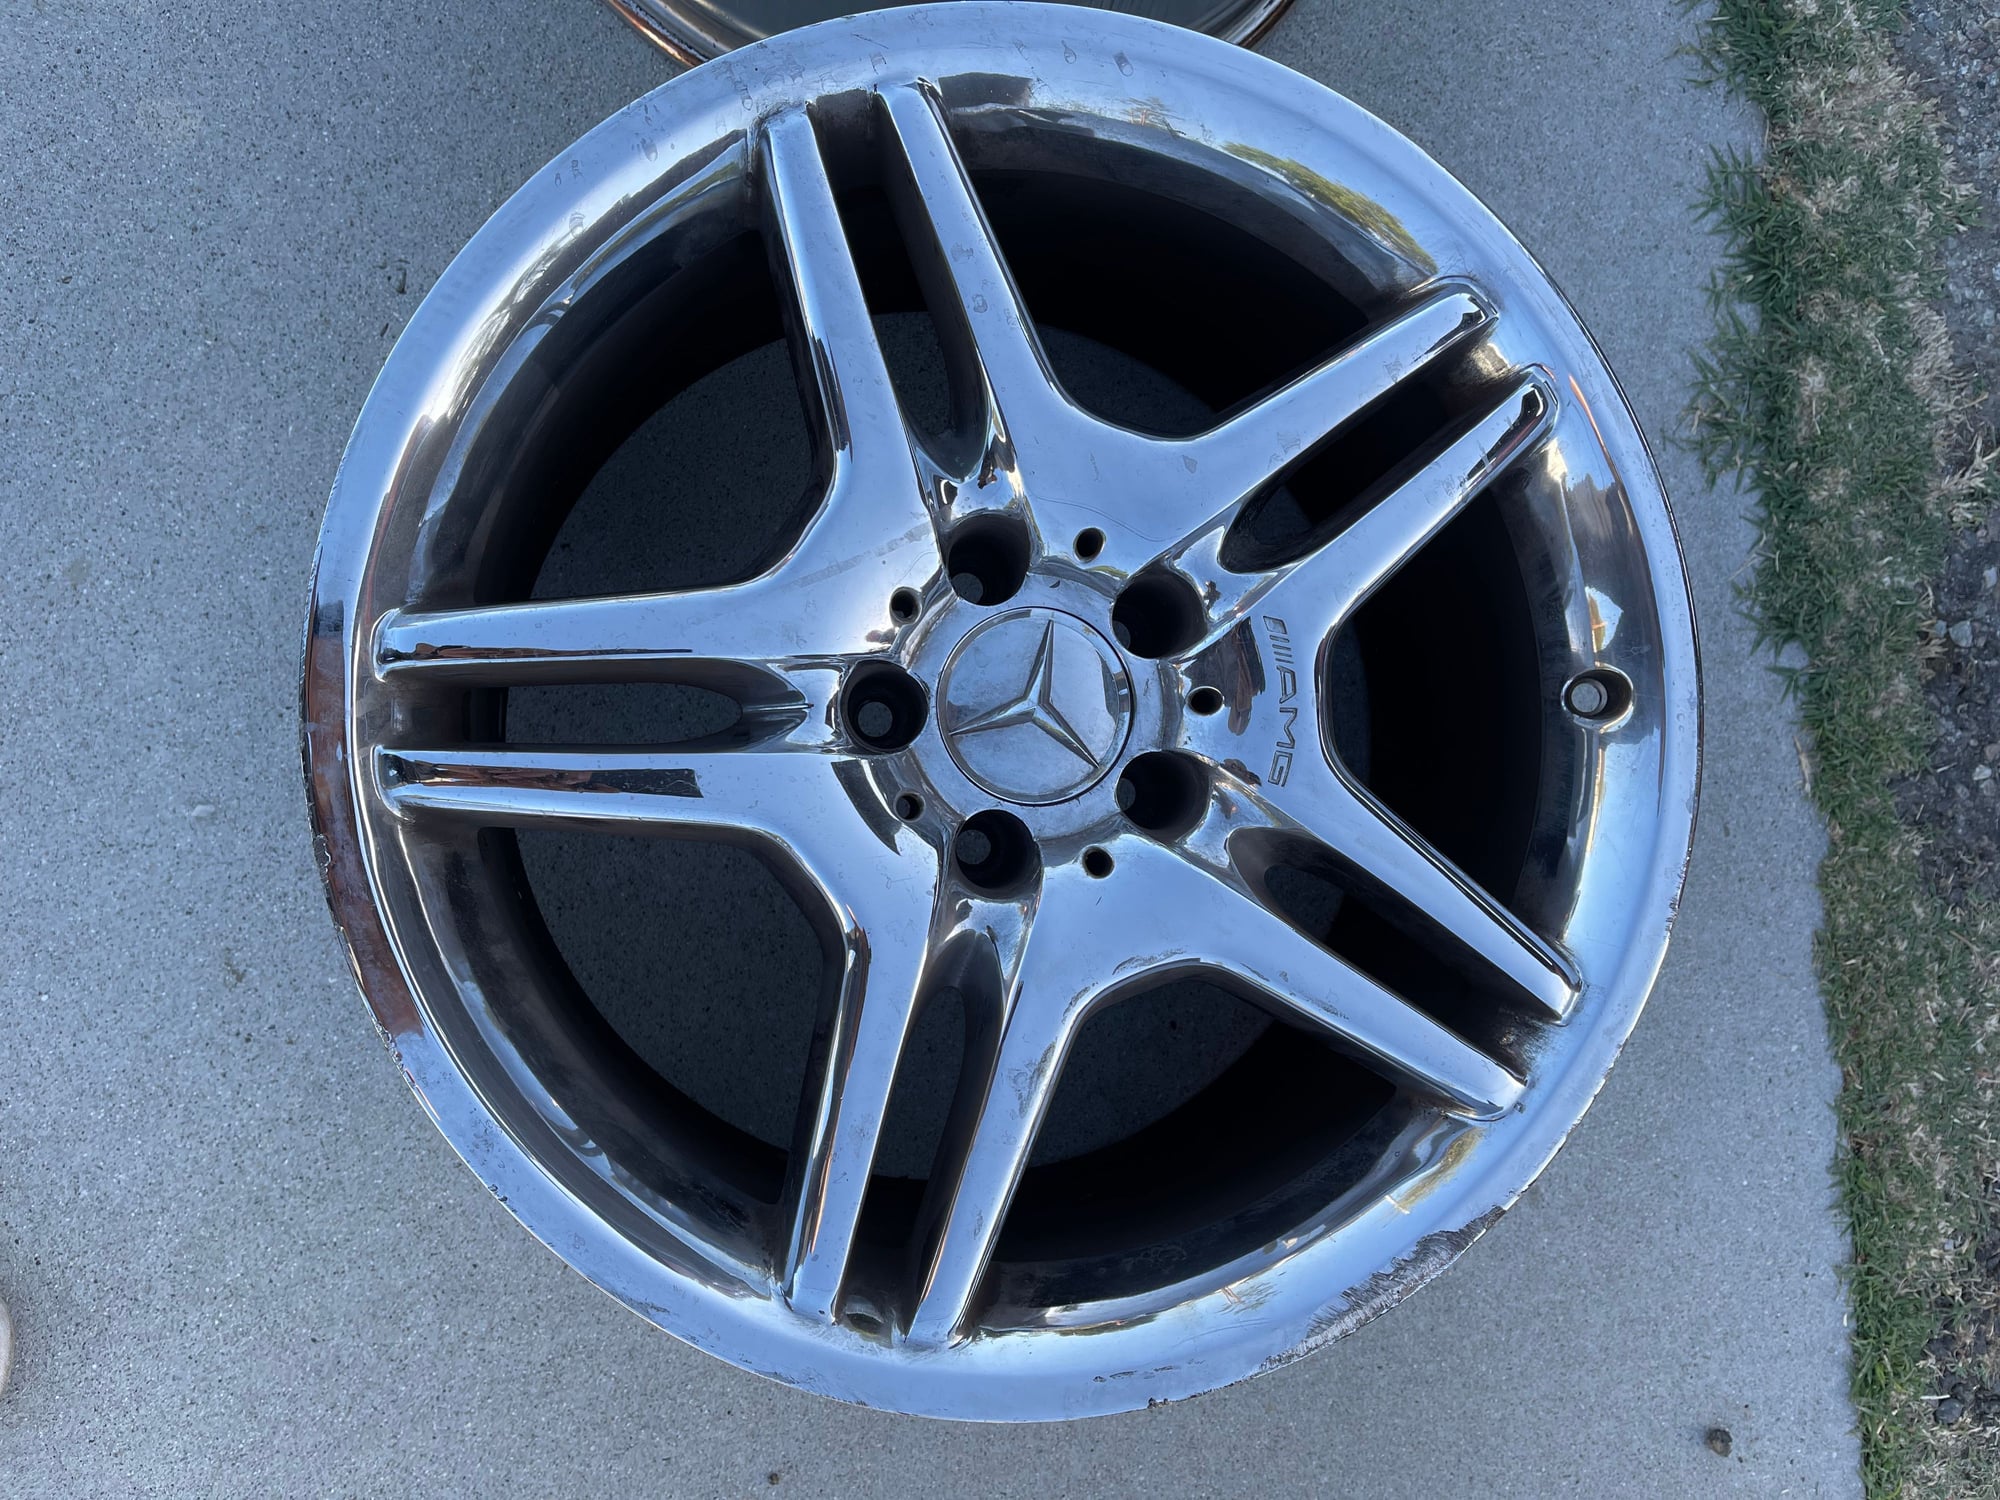 Wheels and Tires/Axles - SoCal - Staggered 18” Chrome AMG Wheels - Used - 0  All Models - Los Angeles, CA 90012, United States